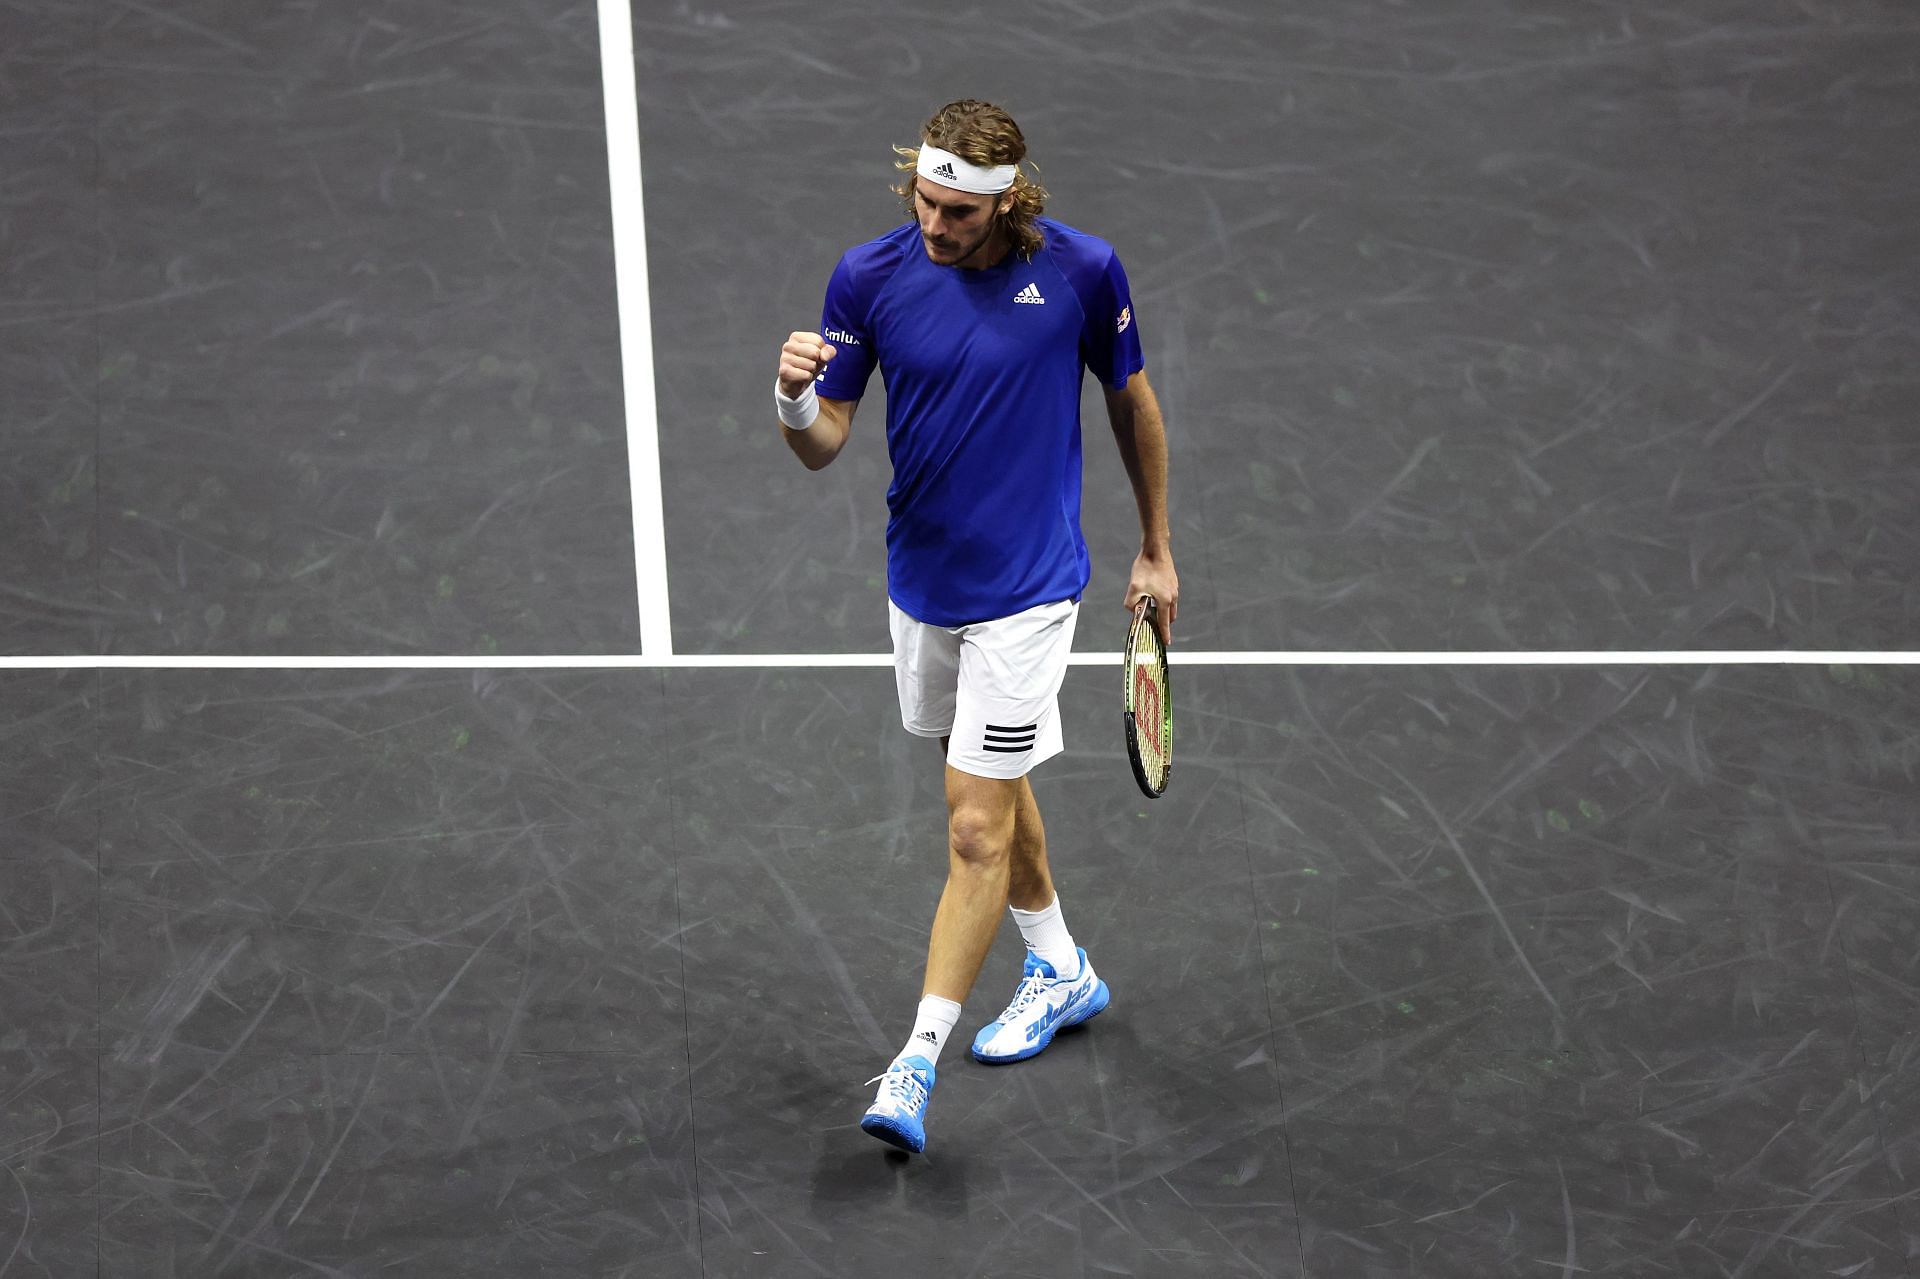 Tsitsipas in action at the 2022 Laver Cup